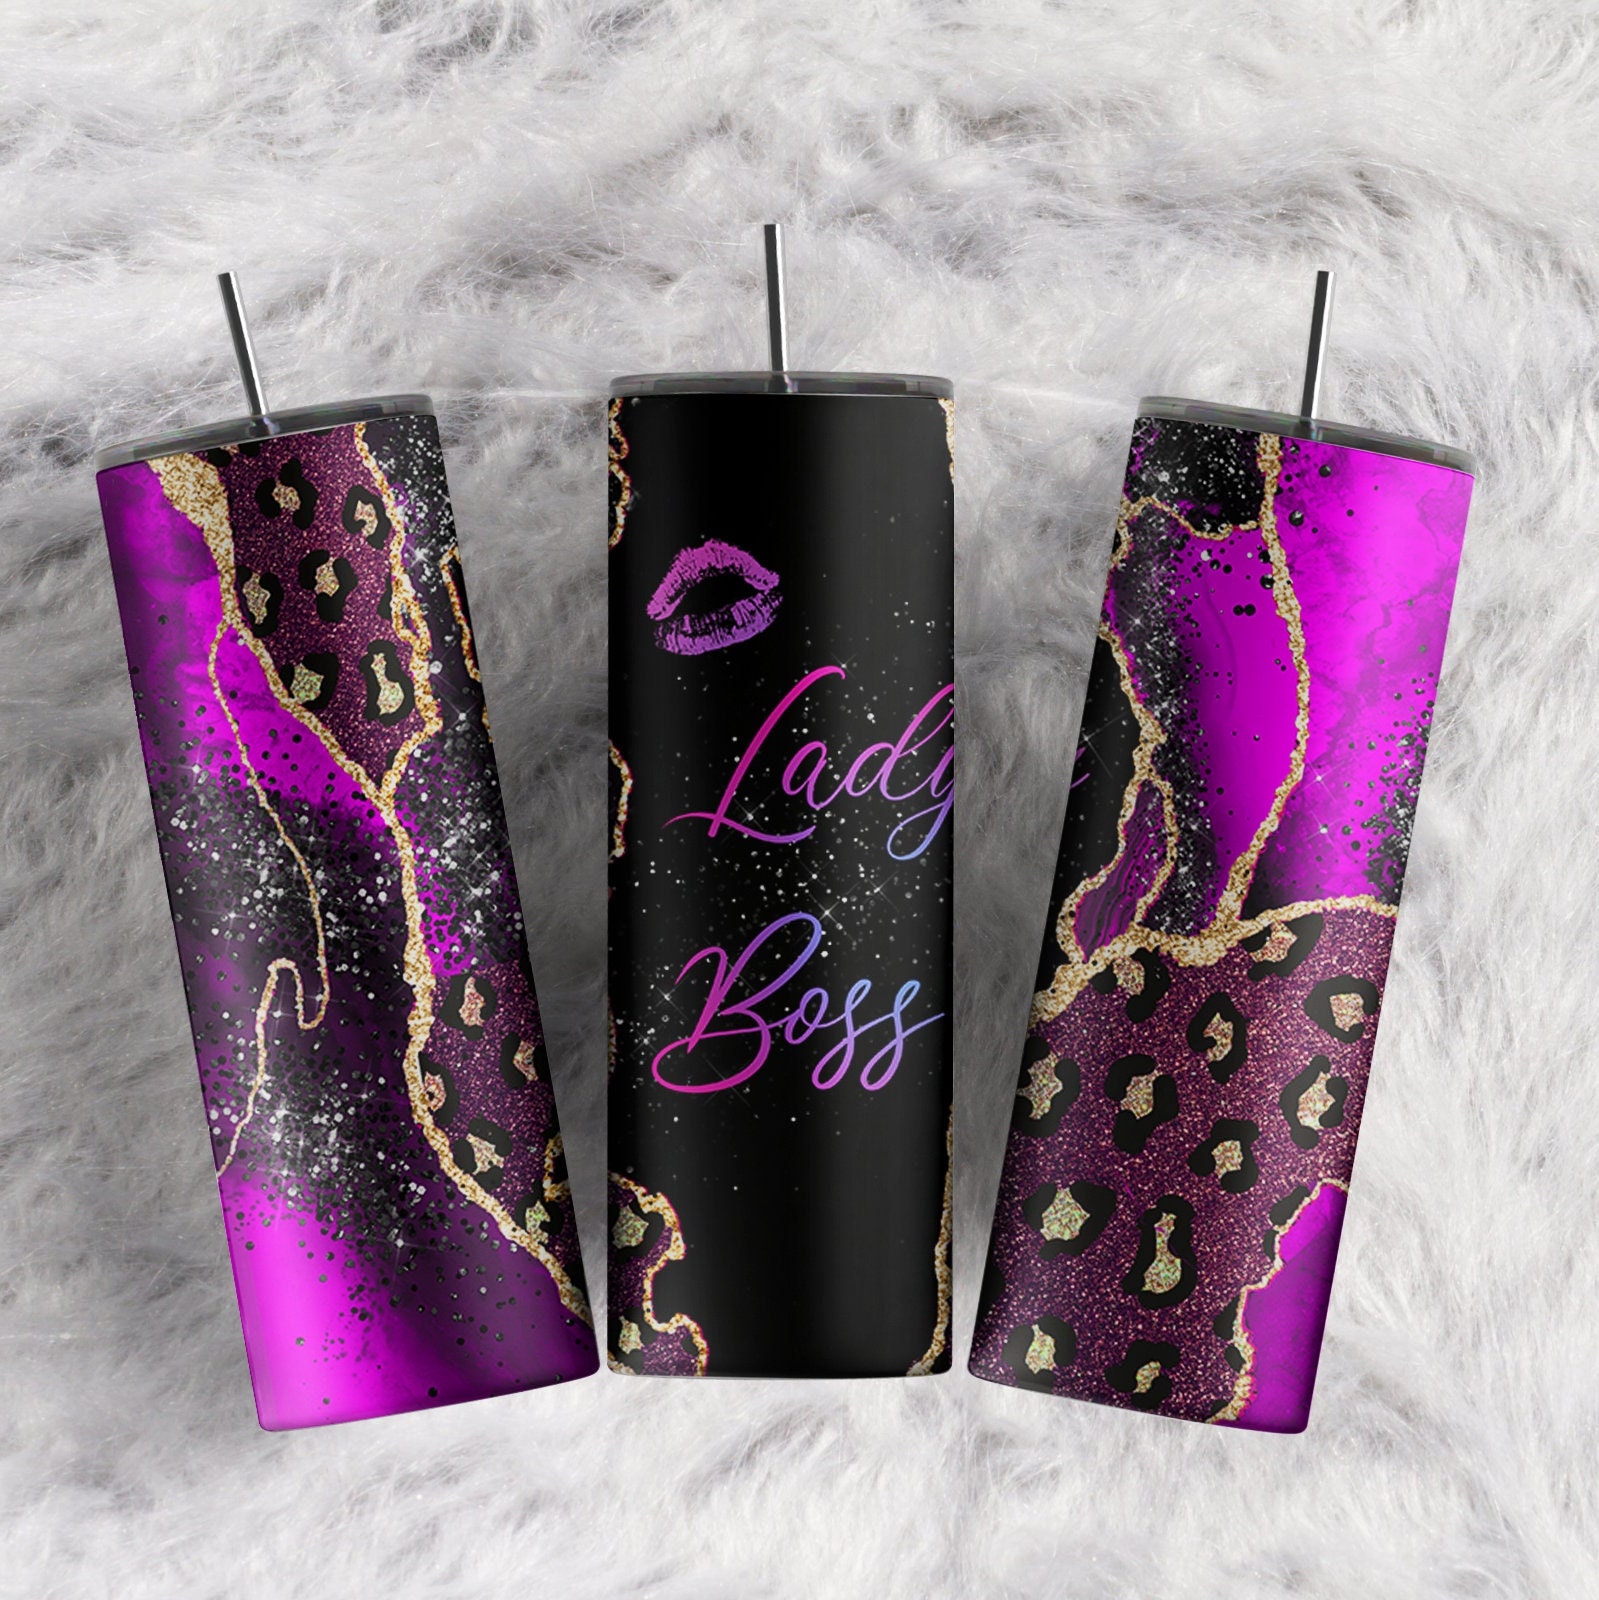 Little Boss Kids Tumblers (More Color Options) – With Love Boss Lady